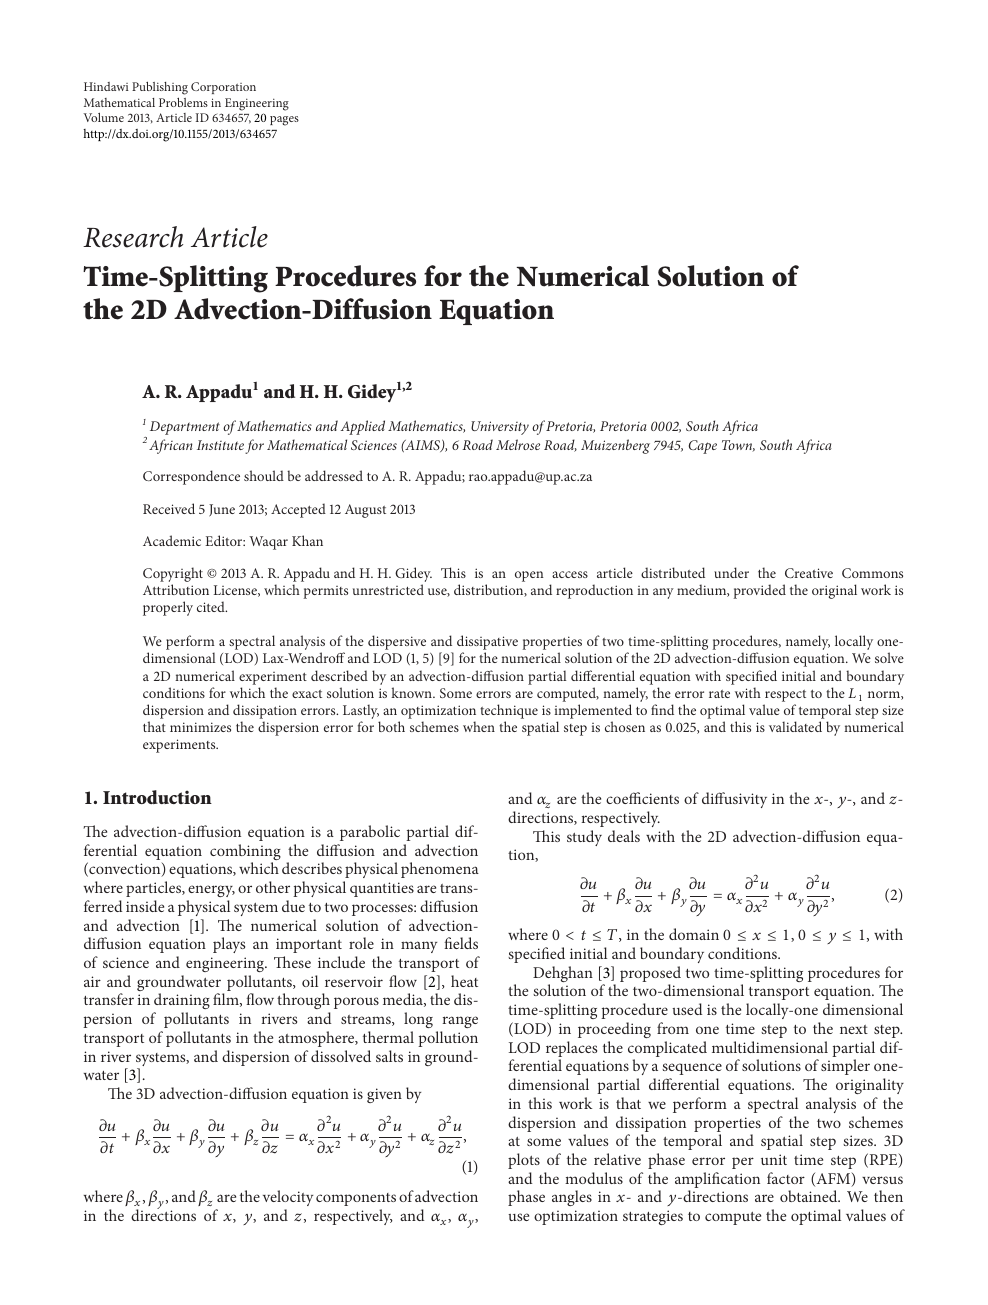 Time Splitting Procedures For The Numerical Solution Of The 2d Advection Diffusion Equation Topic Of Research Paper In Mathematics Download Scholarly Article Pdf And Read For Free On Cyberleninka Open Science Hub